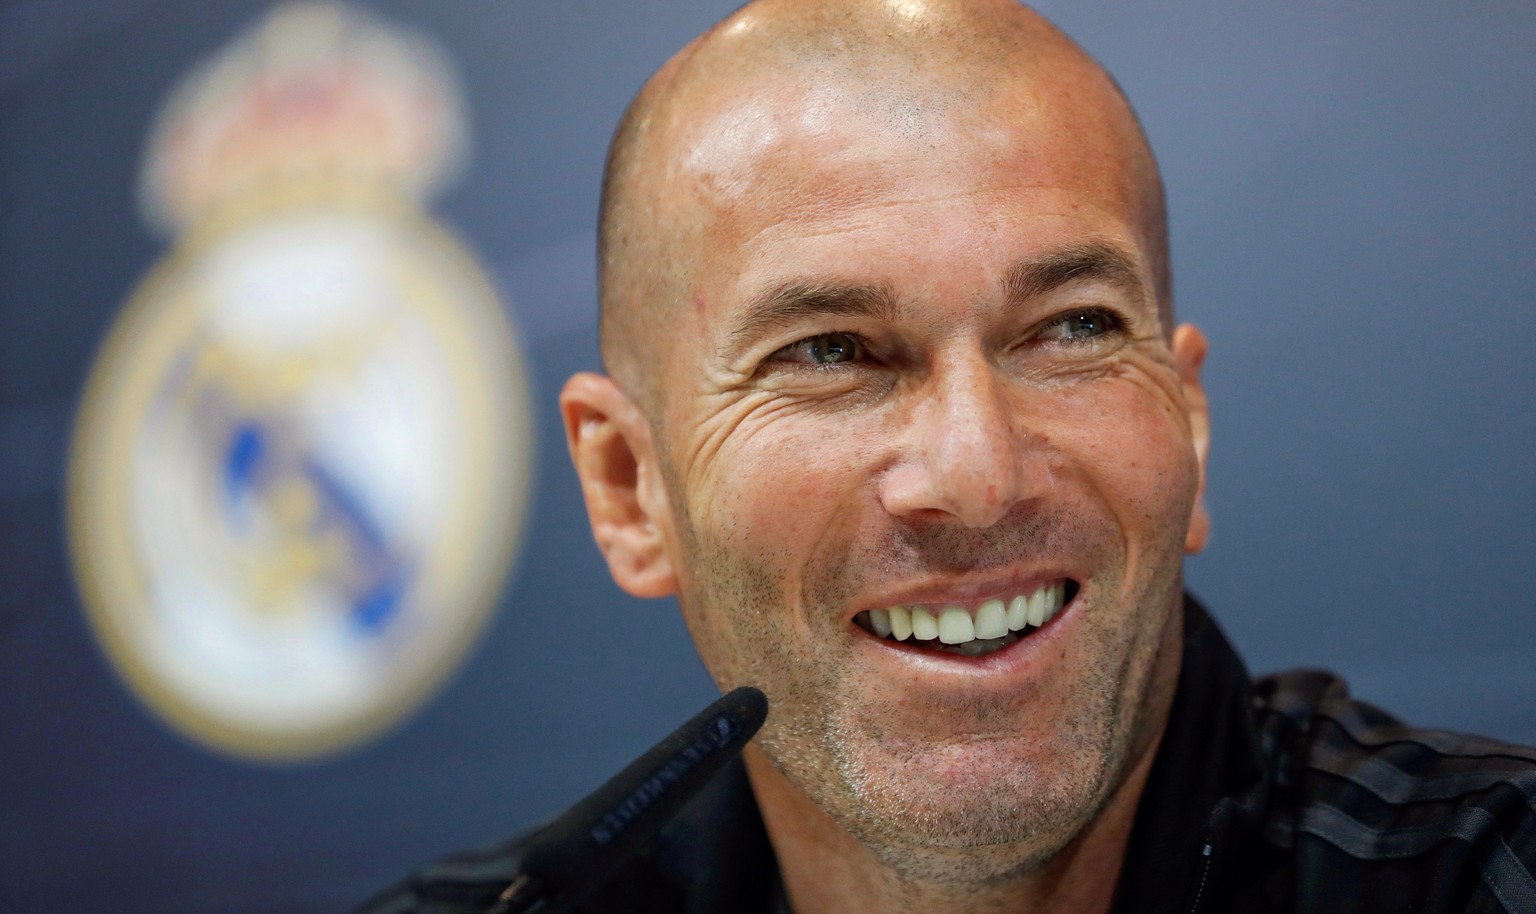 epa07429194 (FILE) - Real Madrid&#039;s head coach Zinedine Zidane attends a press conference in Madrid, Spain, 11 May 2018 (re-issued 11 March 2019). French head coach Zinedine Zidane is set to retur ...